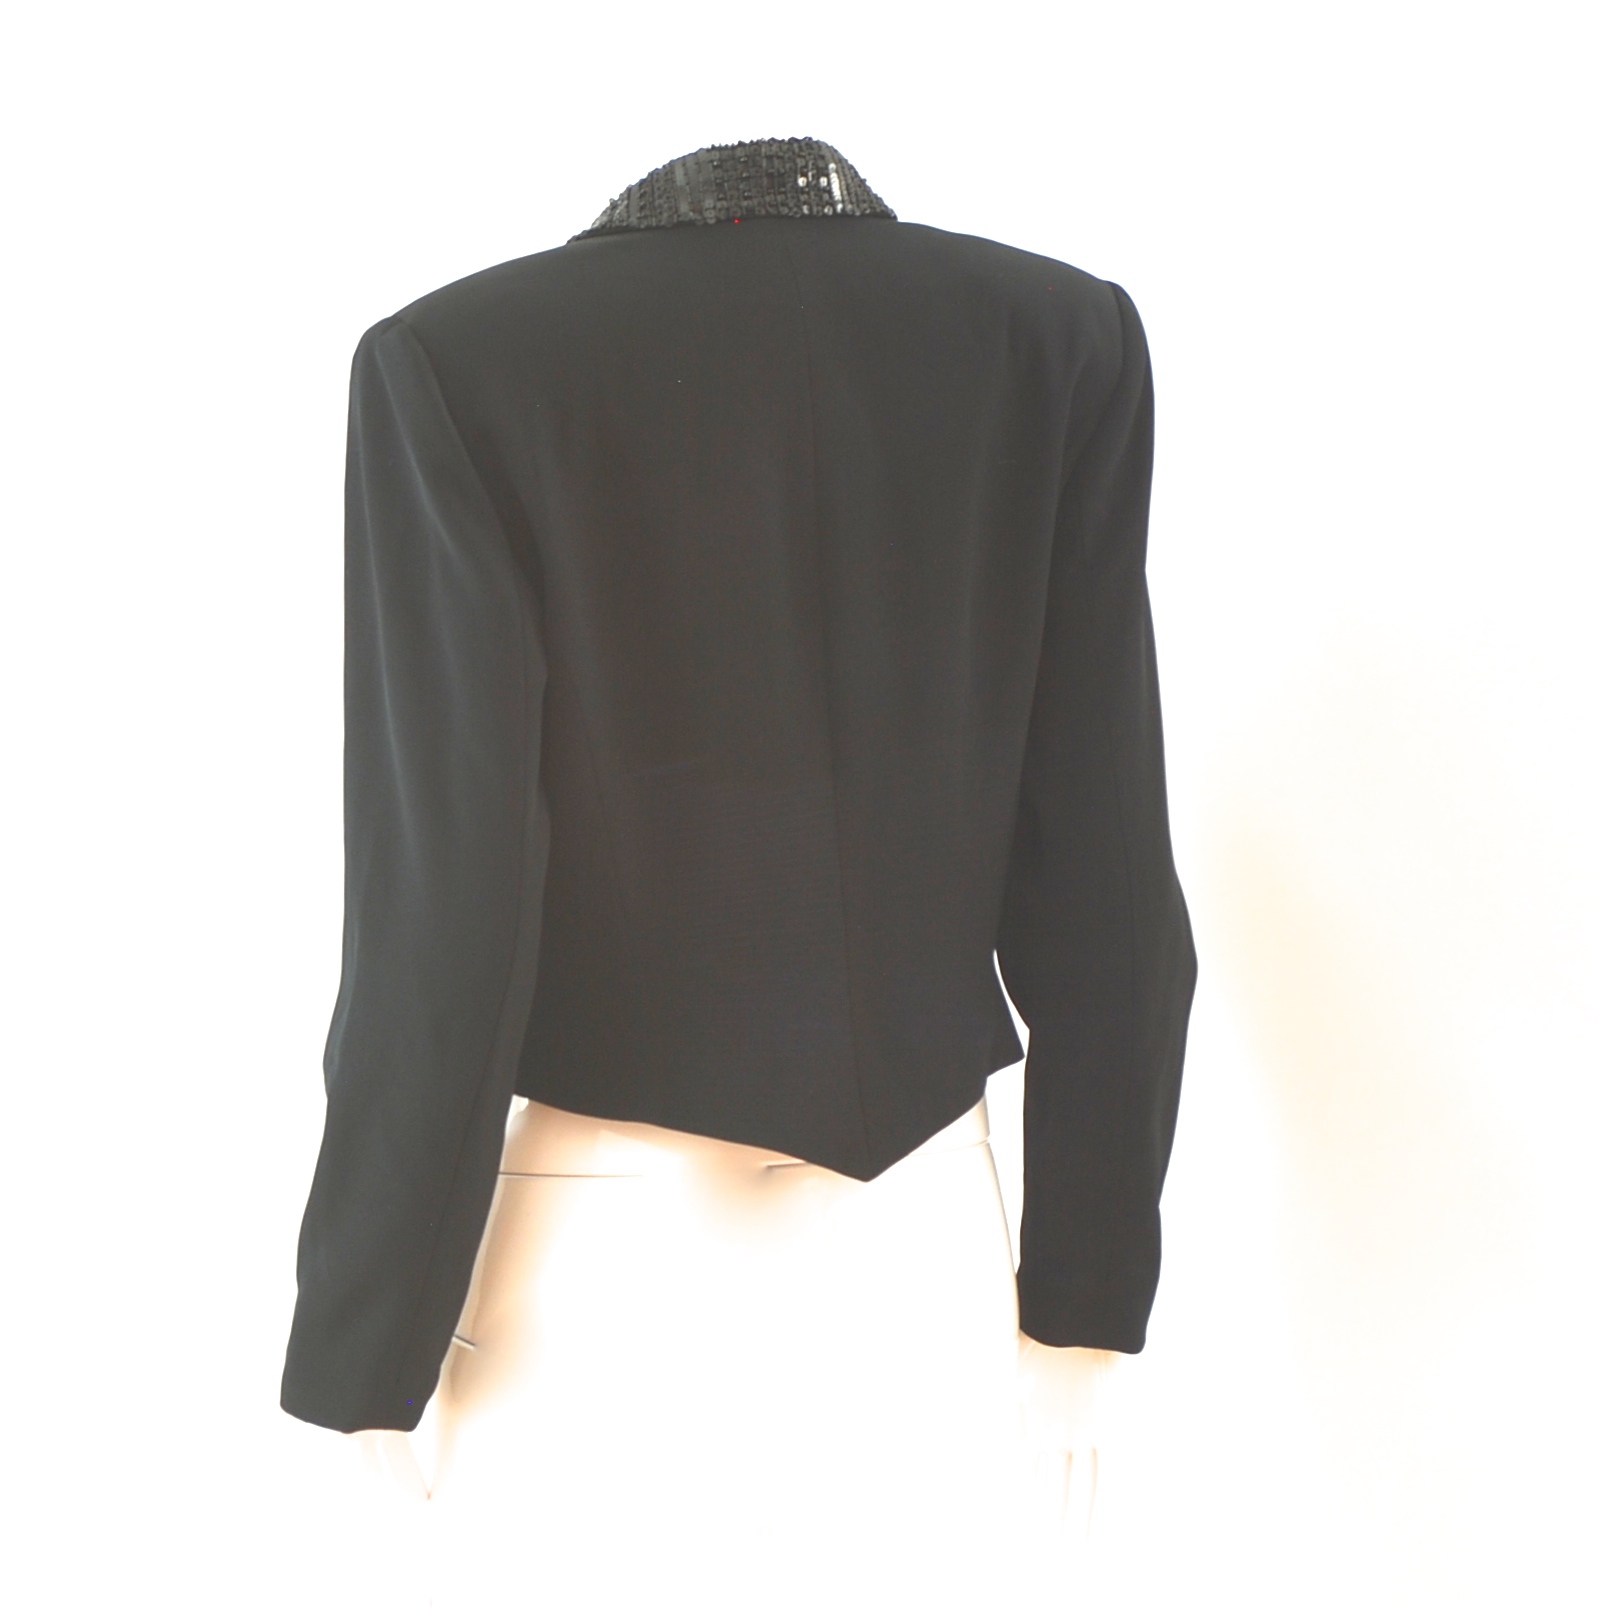 Oleg Cassini Black Tie 1980’s Evening Jacket With Beaded Lapels and ...